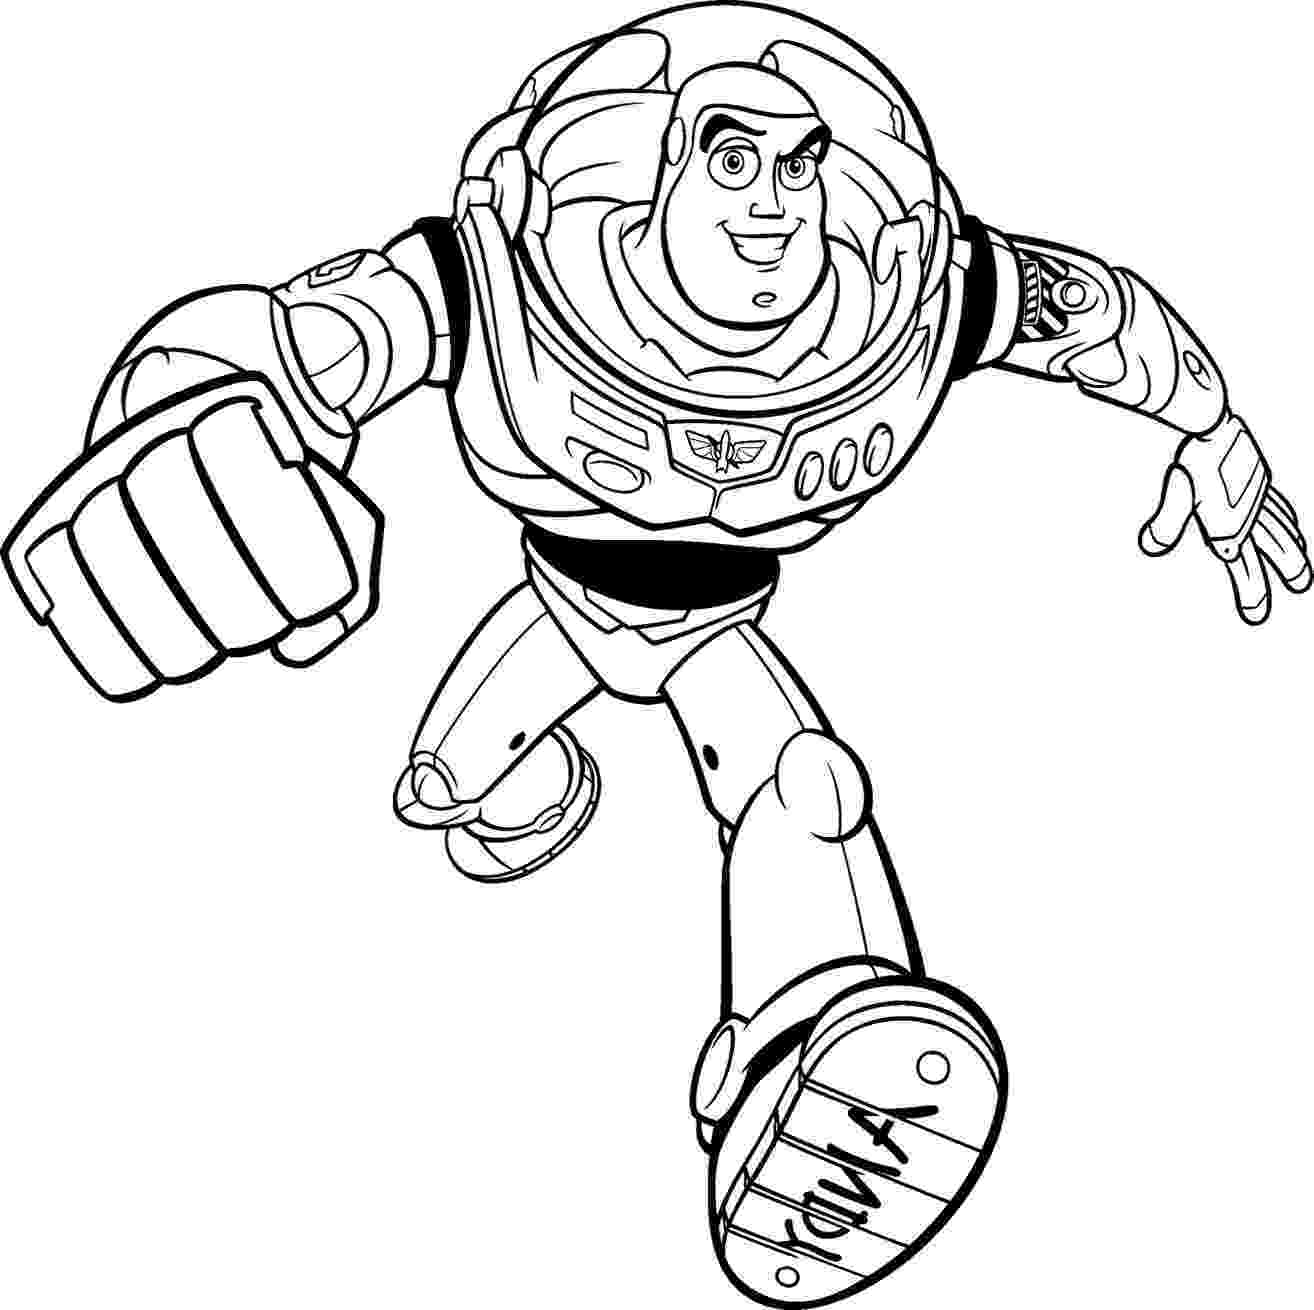 buzz lightyear coloring pages free printable buzz lightyear coloring pages for kids buzz coloring lightyear pages 